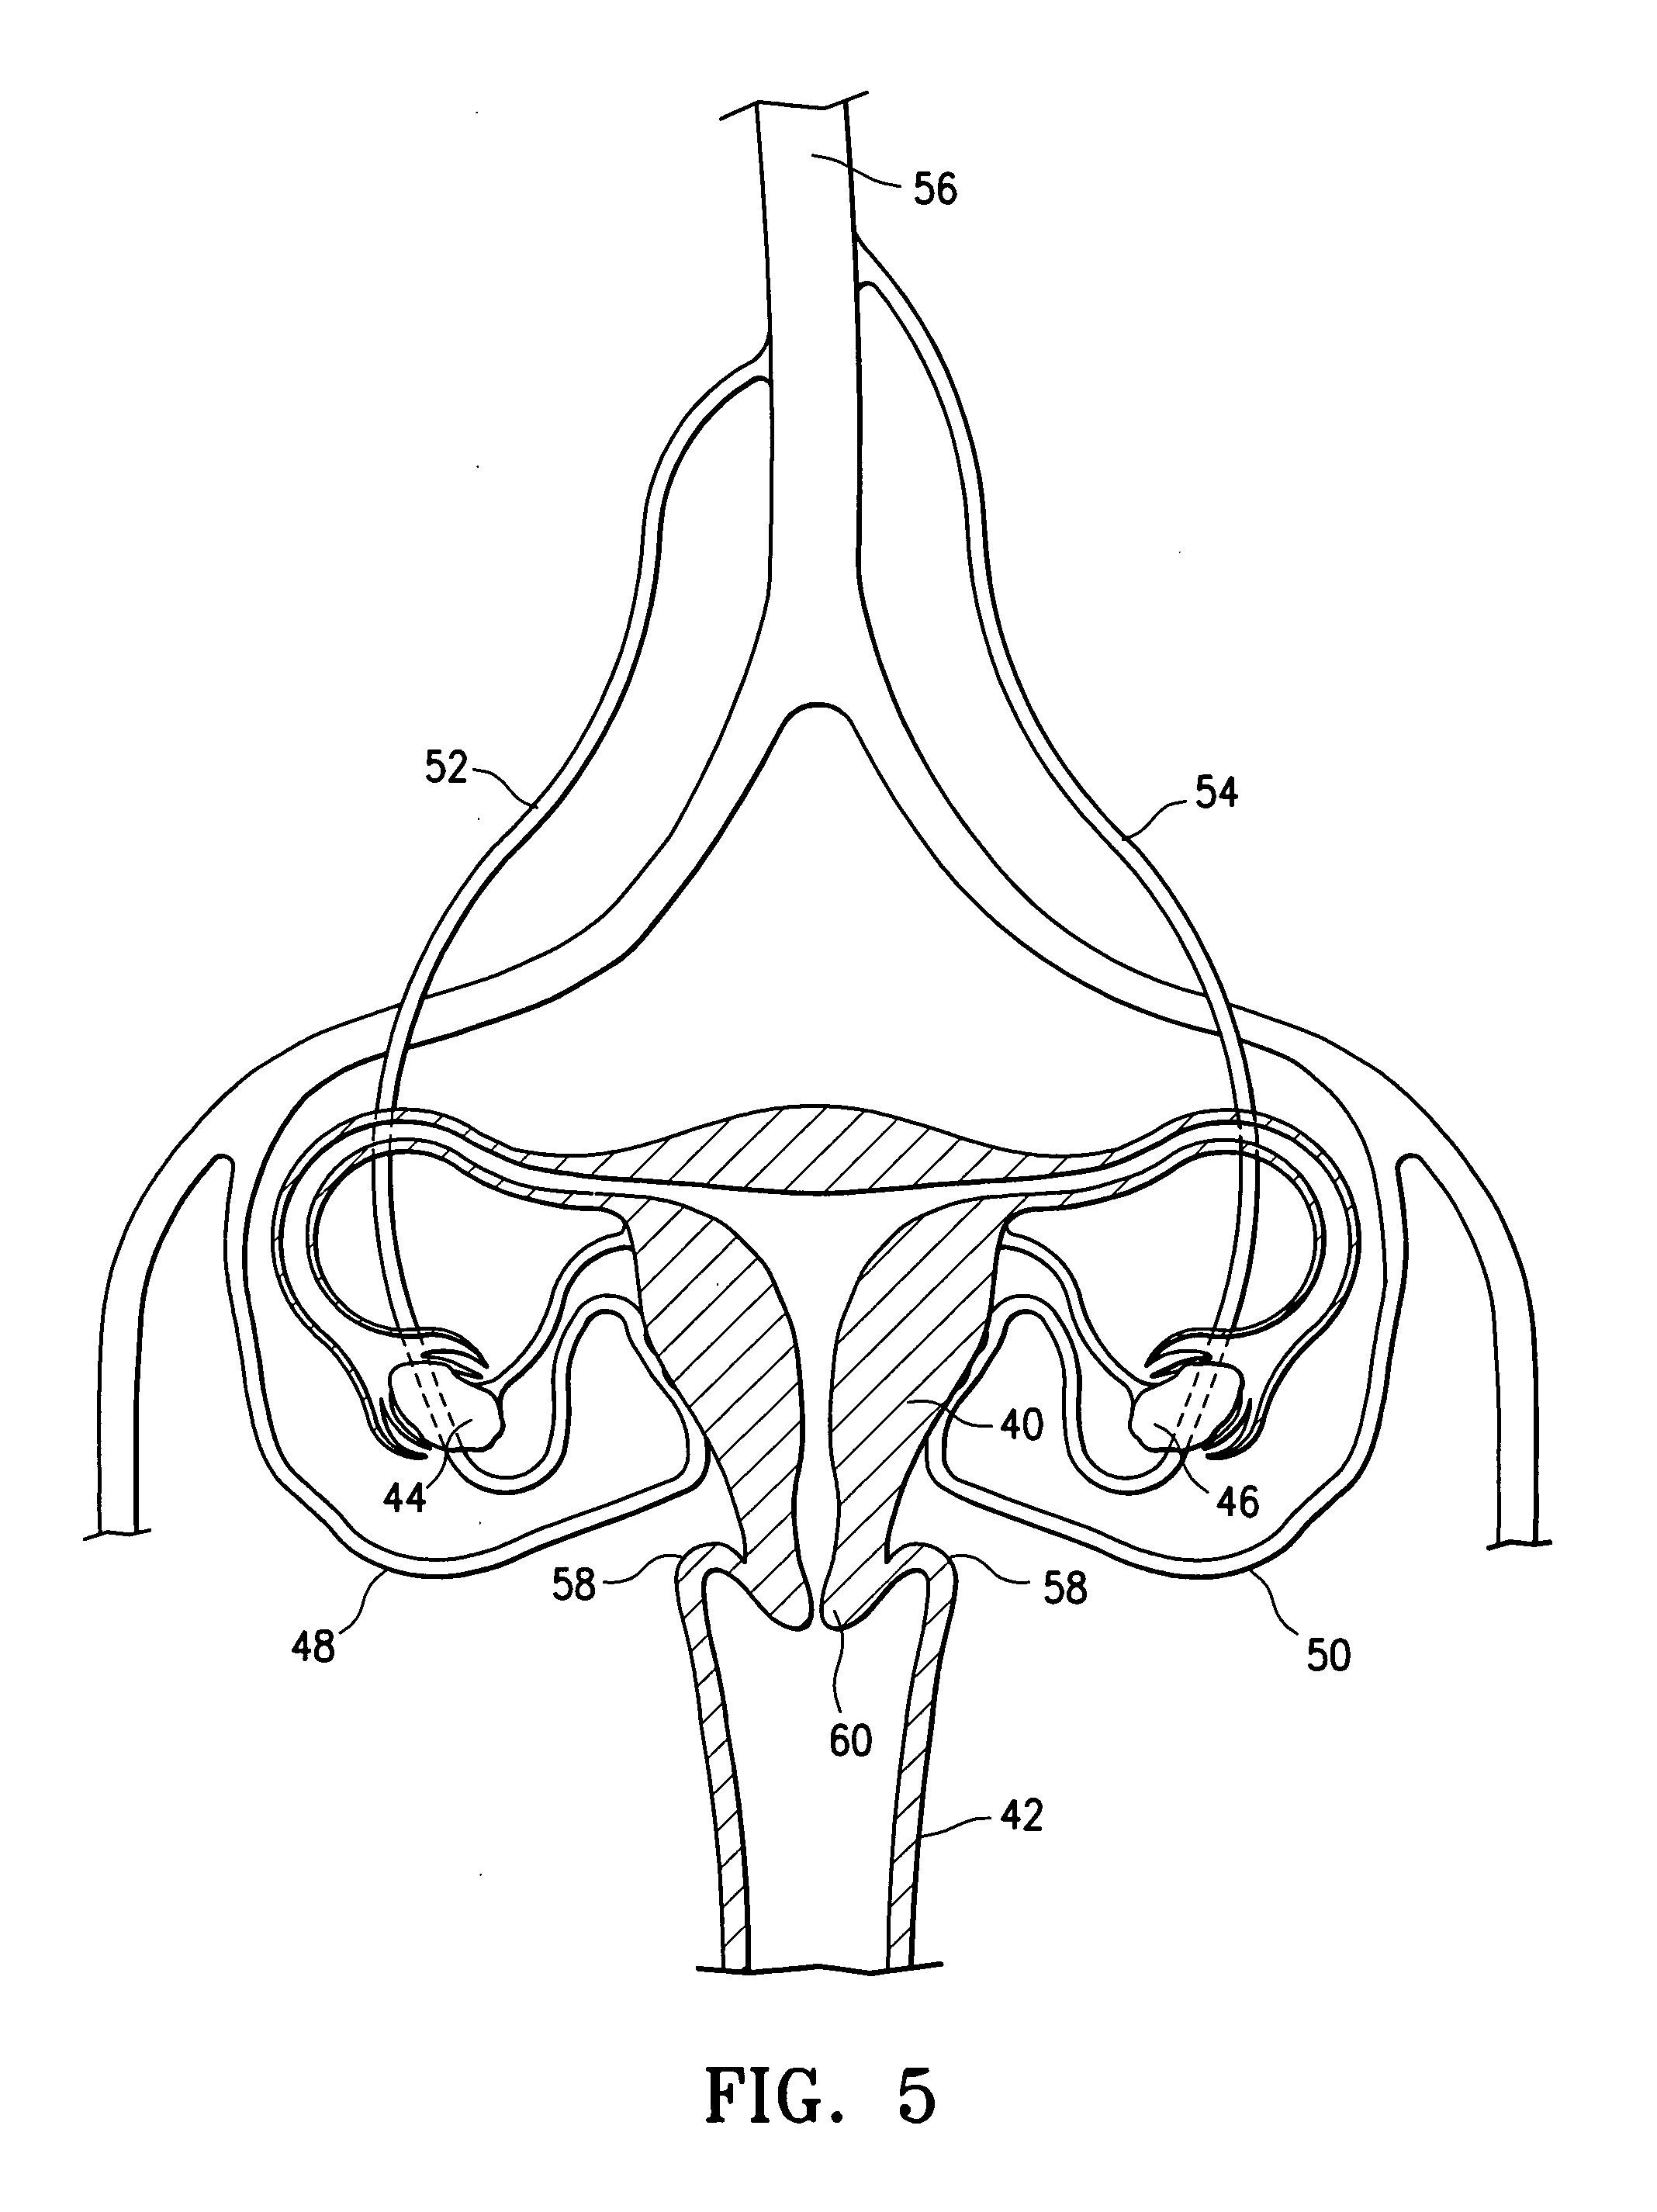 Method and device for treating adenomyosis and endometriosis